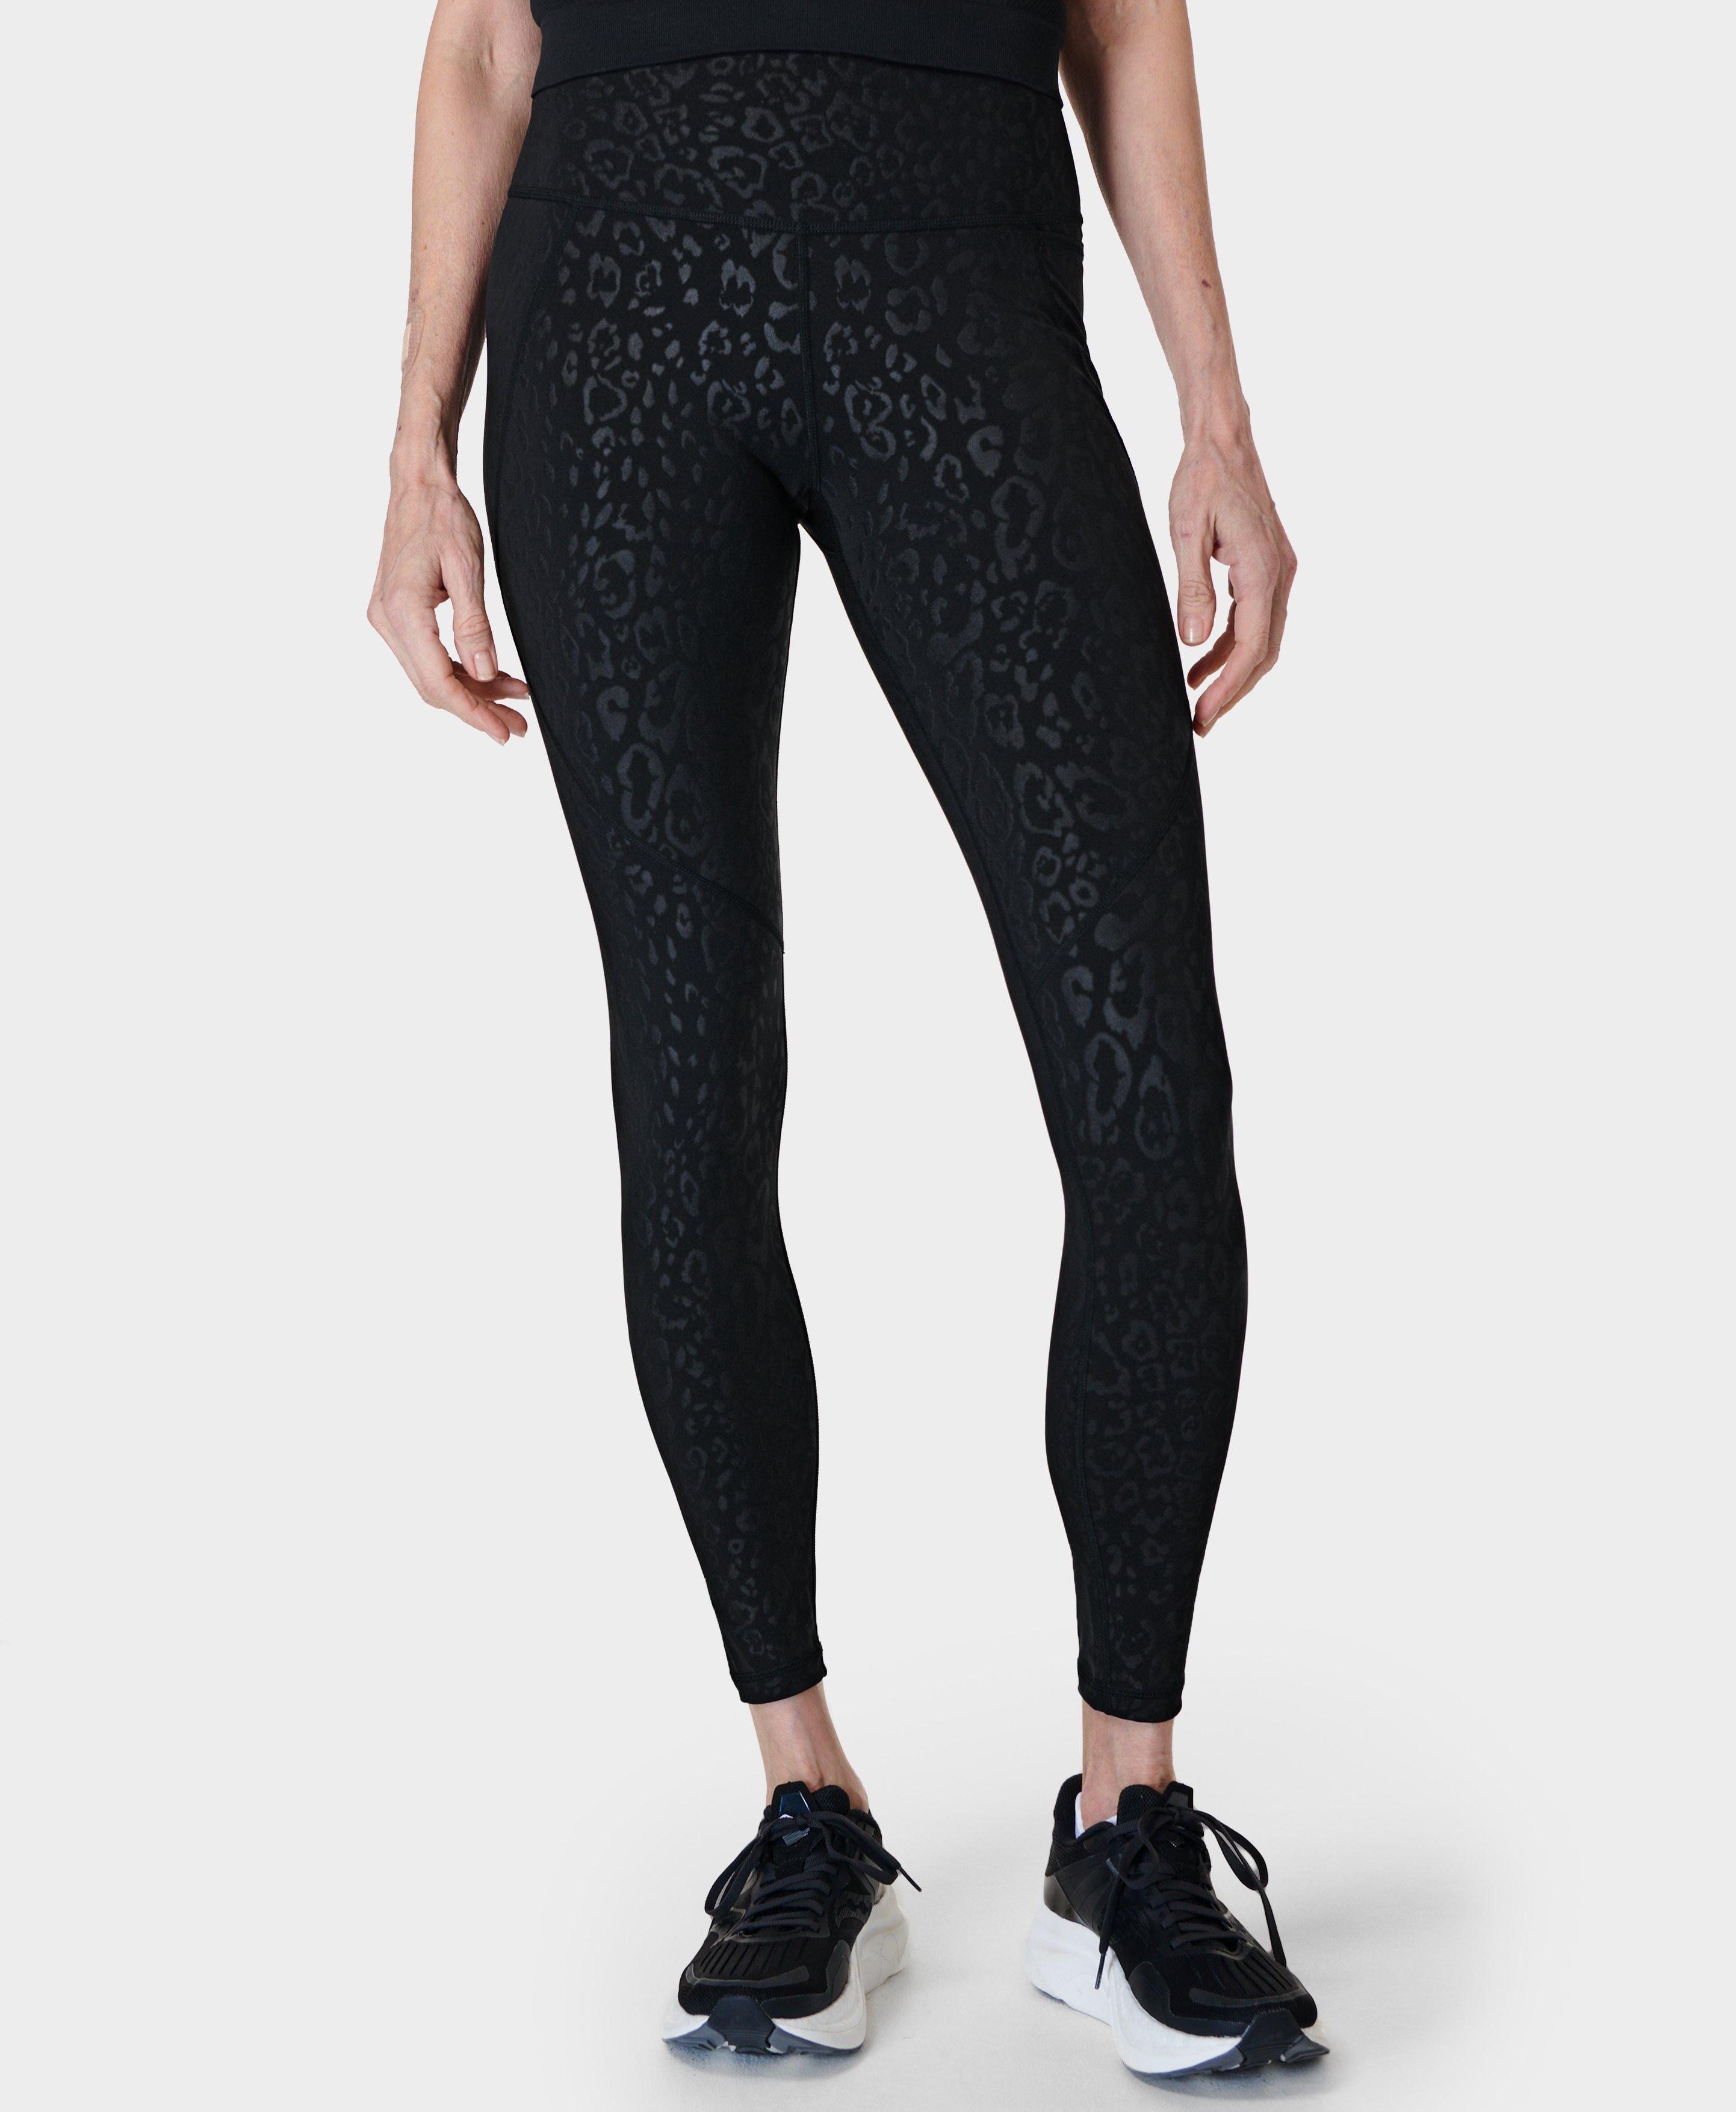 LEOPARD PRINT GYM Leggings Calzedonia Brand New With Tags Size Small 6-8  Womens £13.25 - PicClick UK